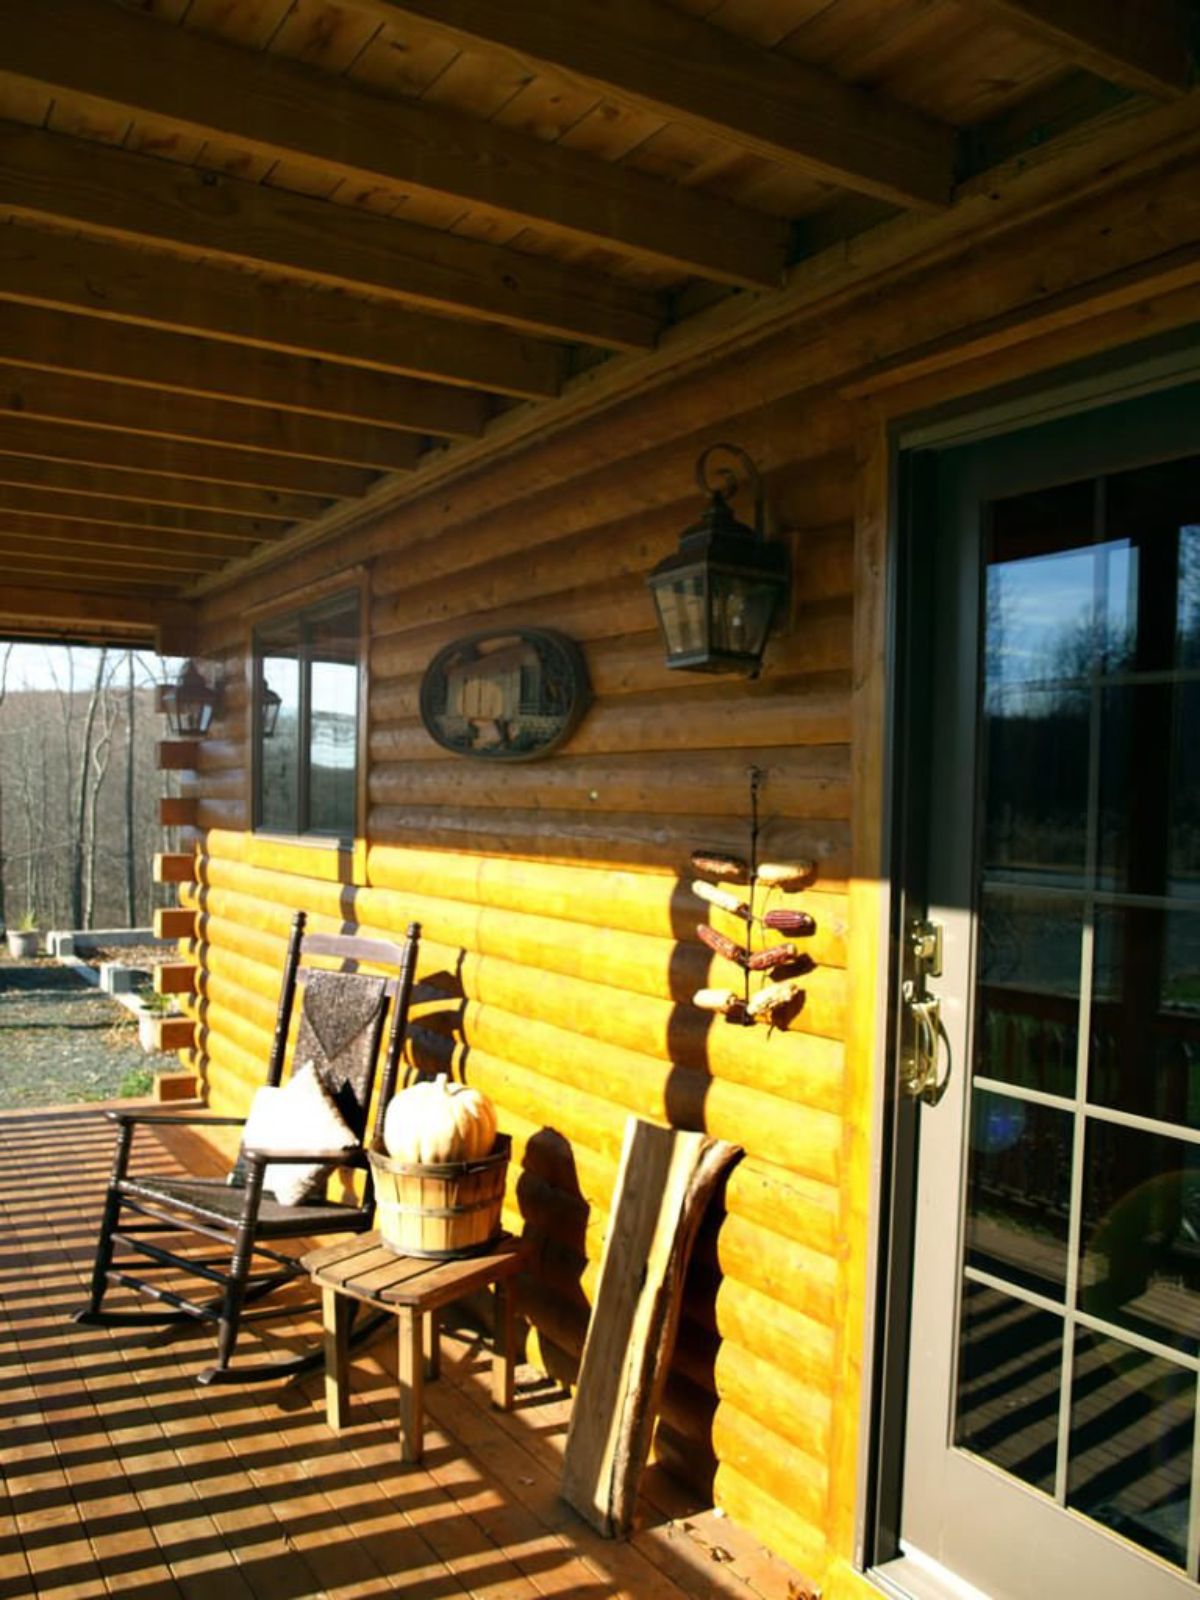 crocking chair against log wall on porch with glass paned door in foreground